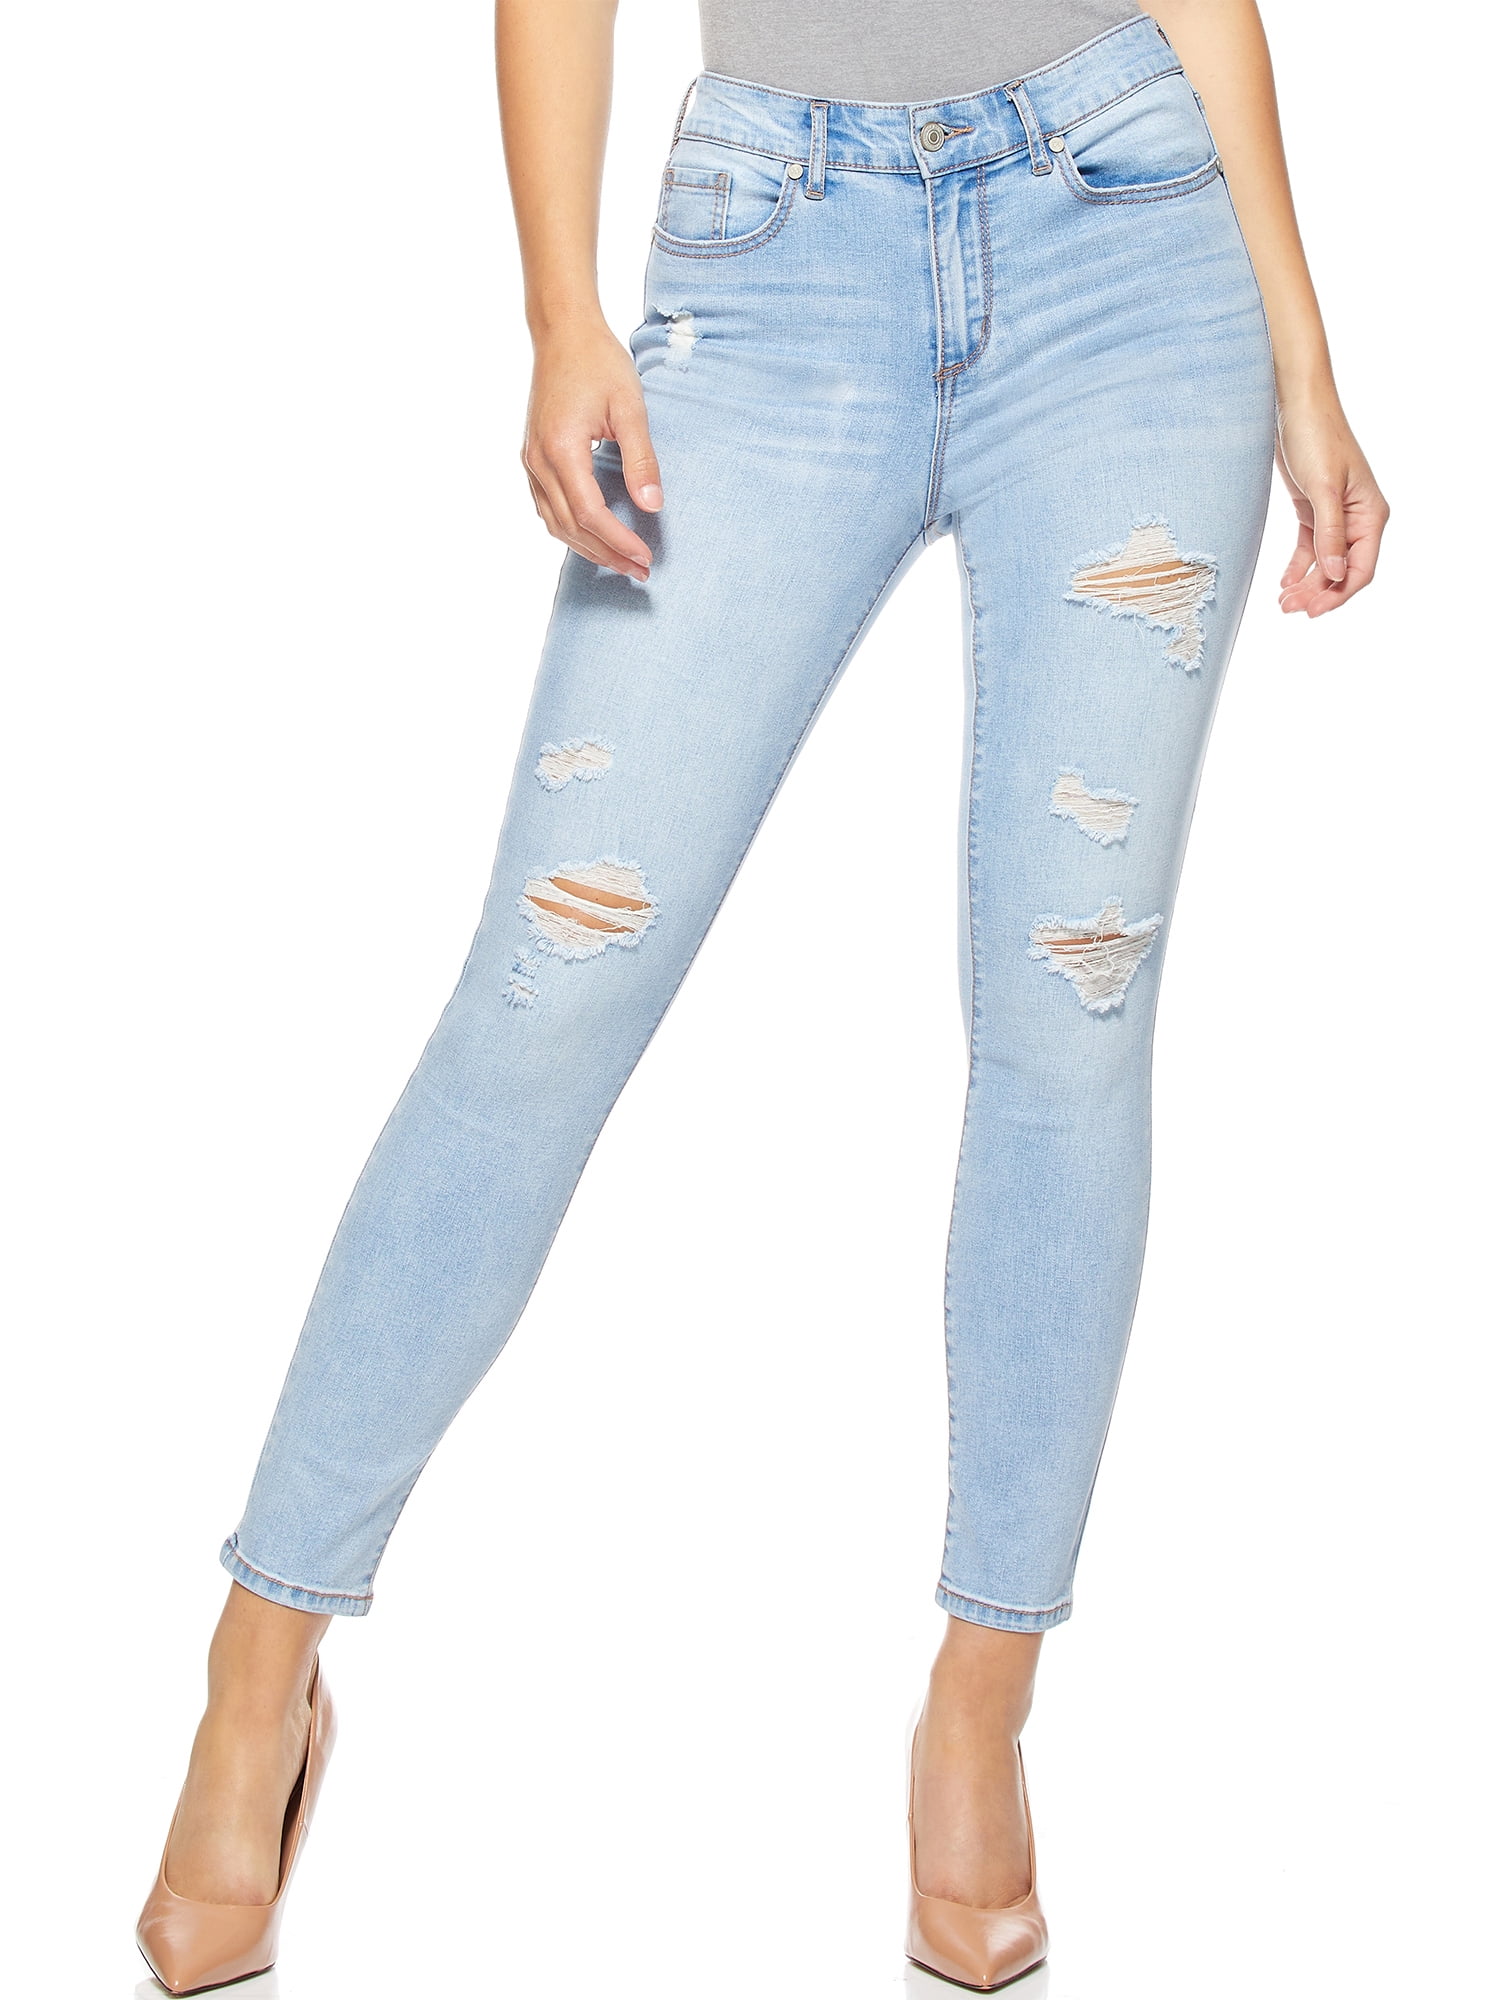 Sofia Jeans Women's Rosa Curvy High Rise Destructed Skinny Ankle Jeans ...